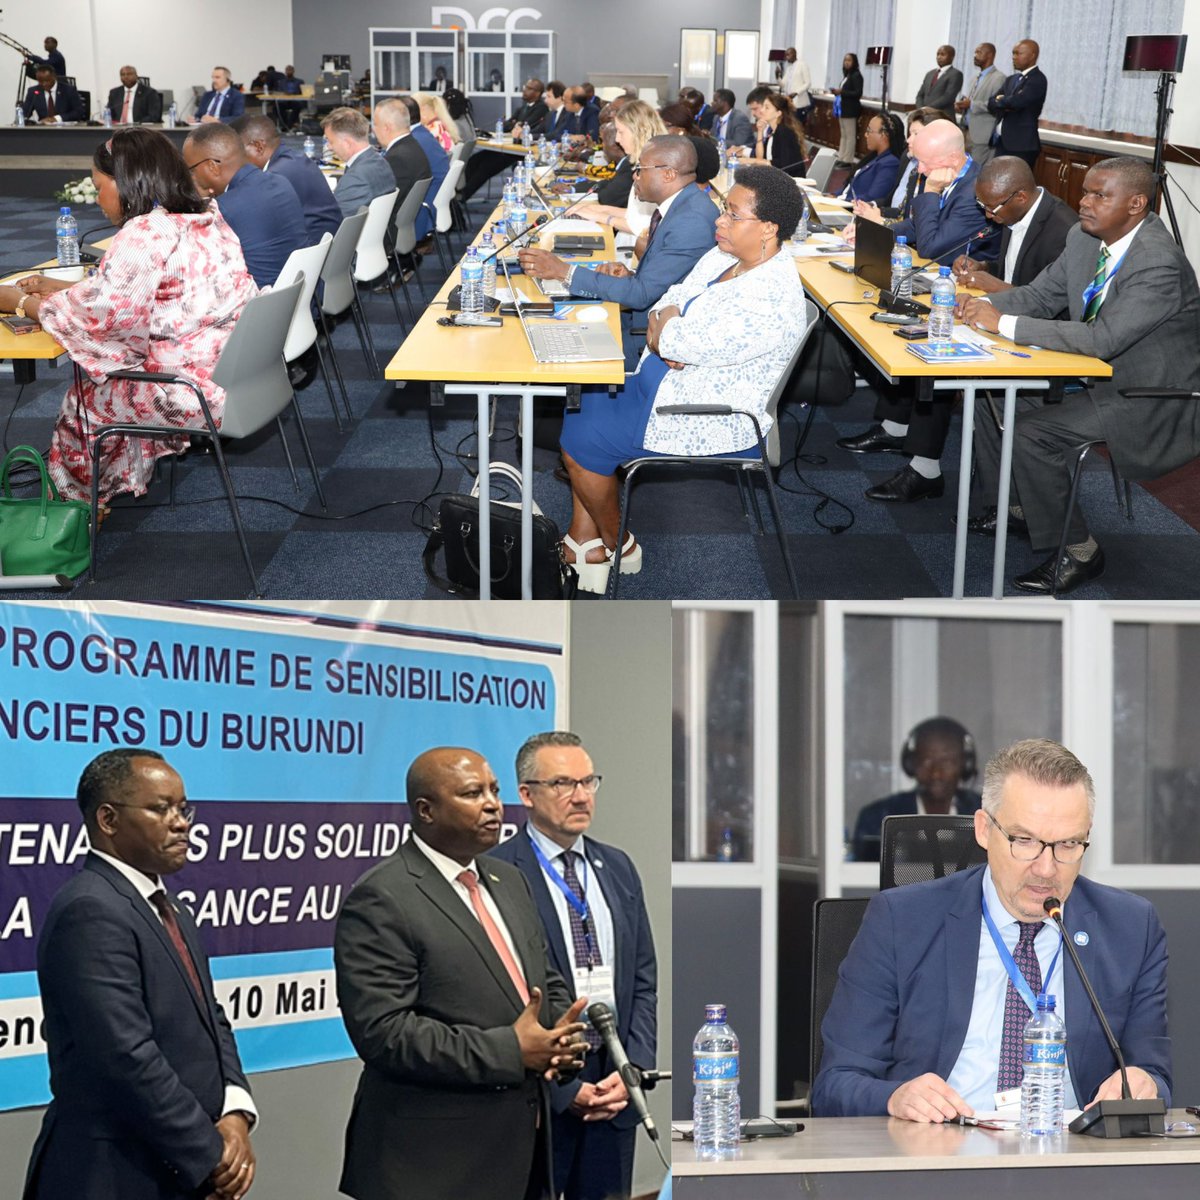 Honored to have joined Min. Niyonzima & Min. Shingiro for@WBG_IDA's Program of Creditor Outreach conference in #Burundi. It was heartening to see partners, creditors, IFIs + fellow MDBs convening to enhance collaboration & support #SustainableFinancing in the country. #IDAworks